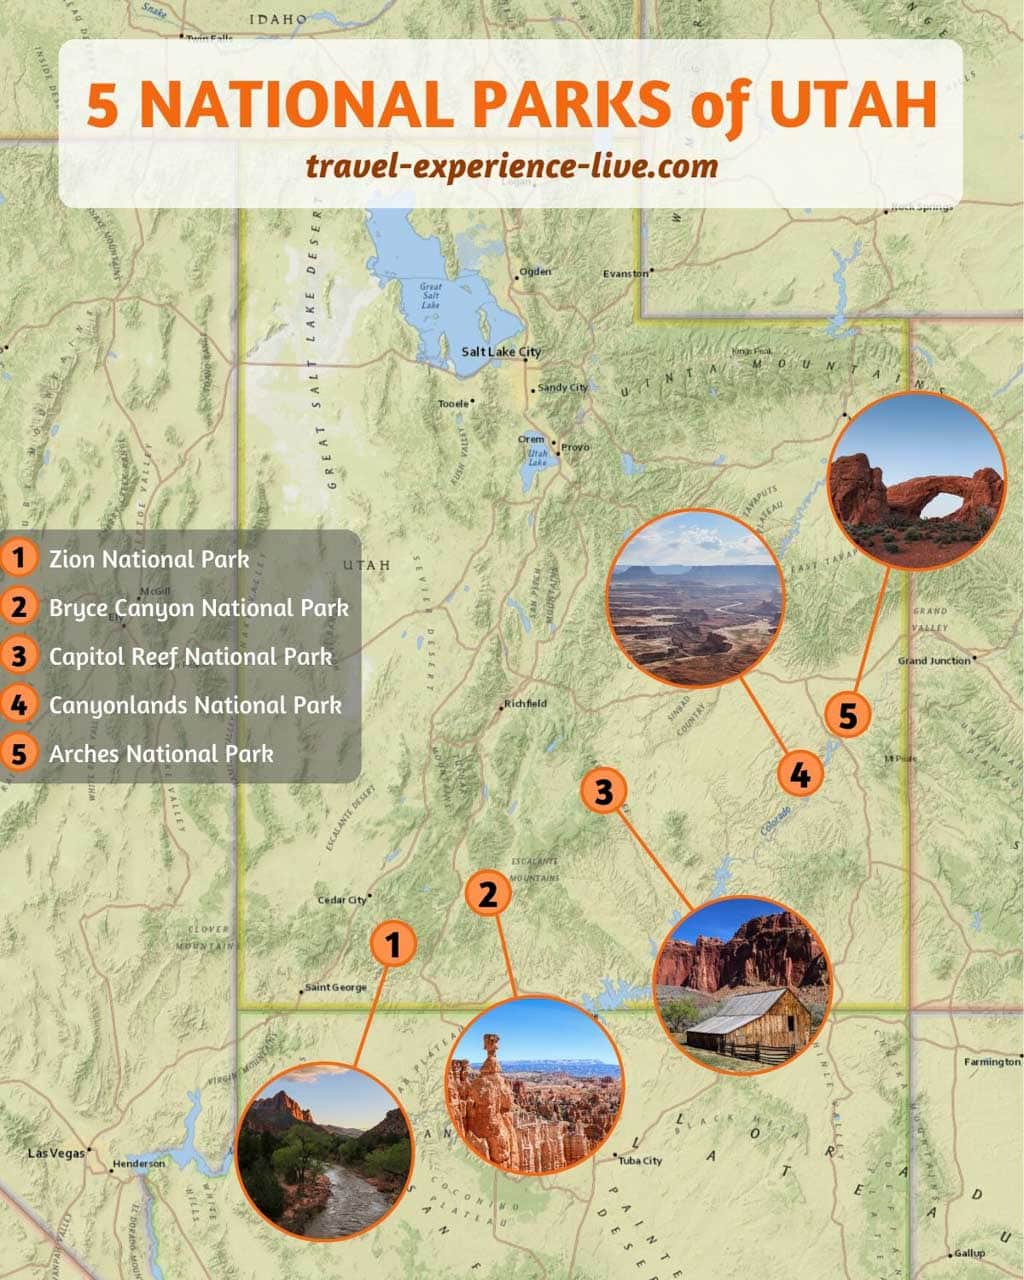 5 Utah National Parks: Zion, Bryce Canyon, Capitol Reef, Canyonlands and Arches